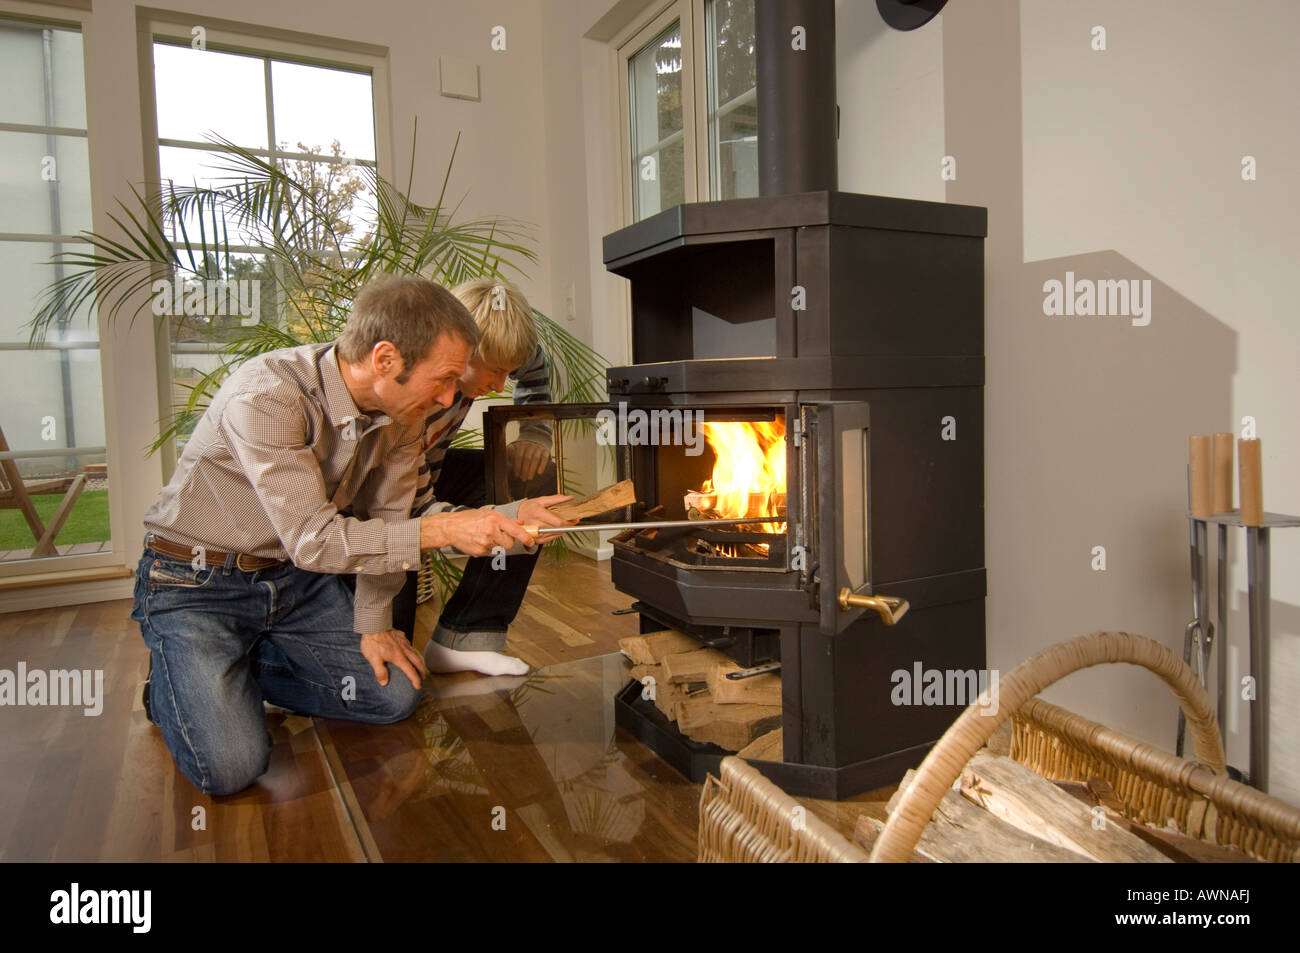 Man and boy firing an oven with wood, low-energy house, Kleinmachnow, Brandenburg, Germany Stock Photo